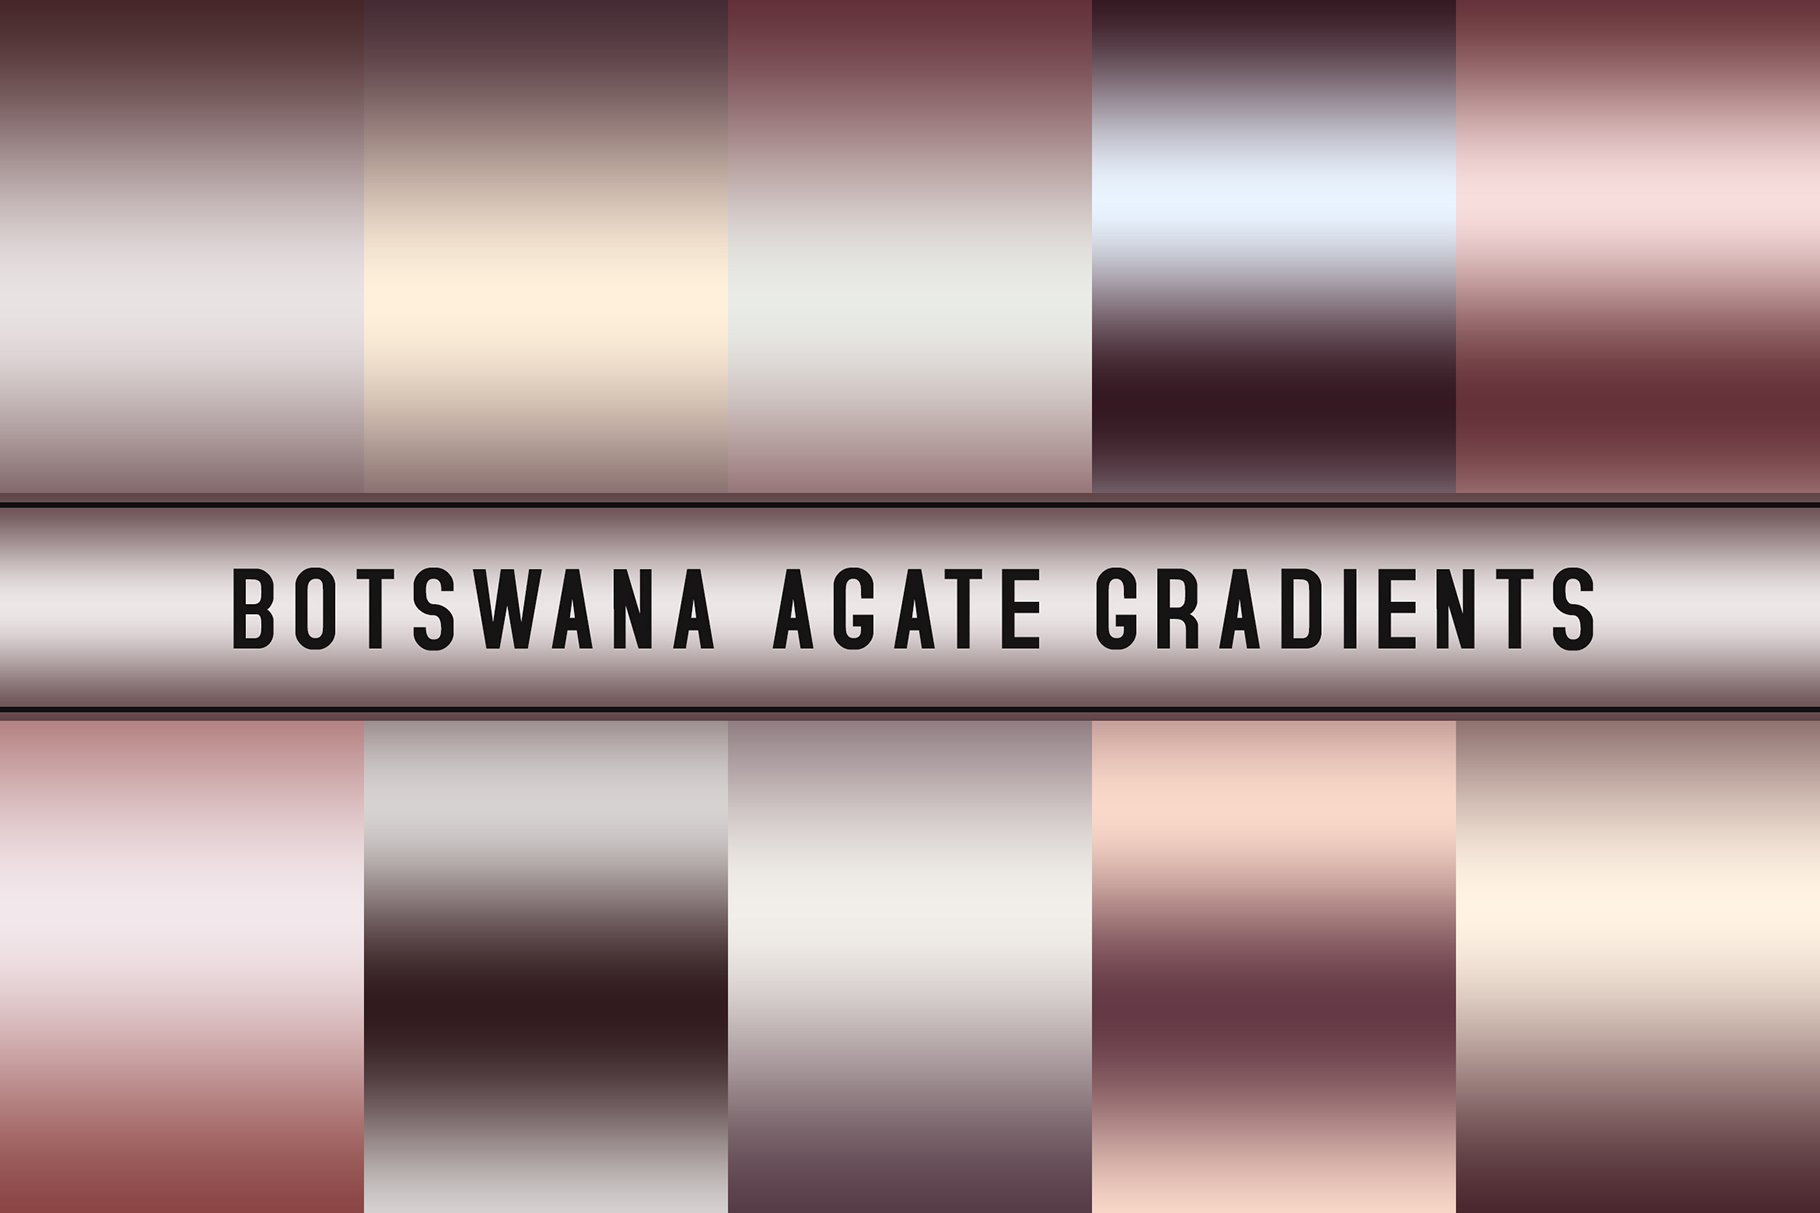 Botswana Agate Gradients cover image.